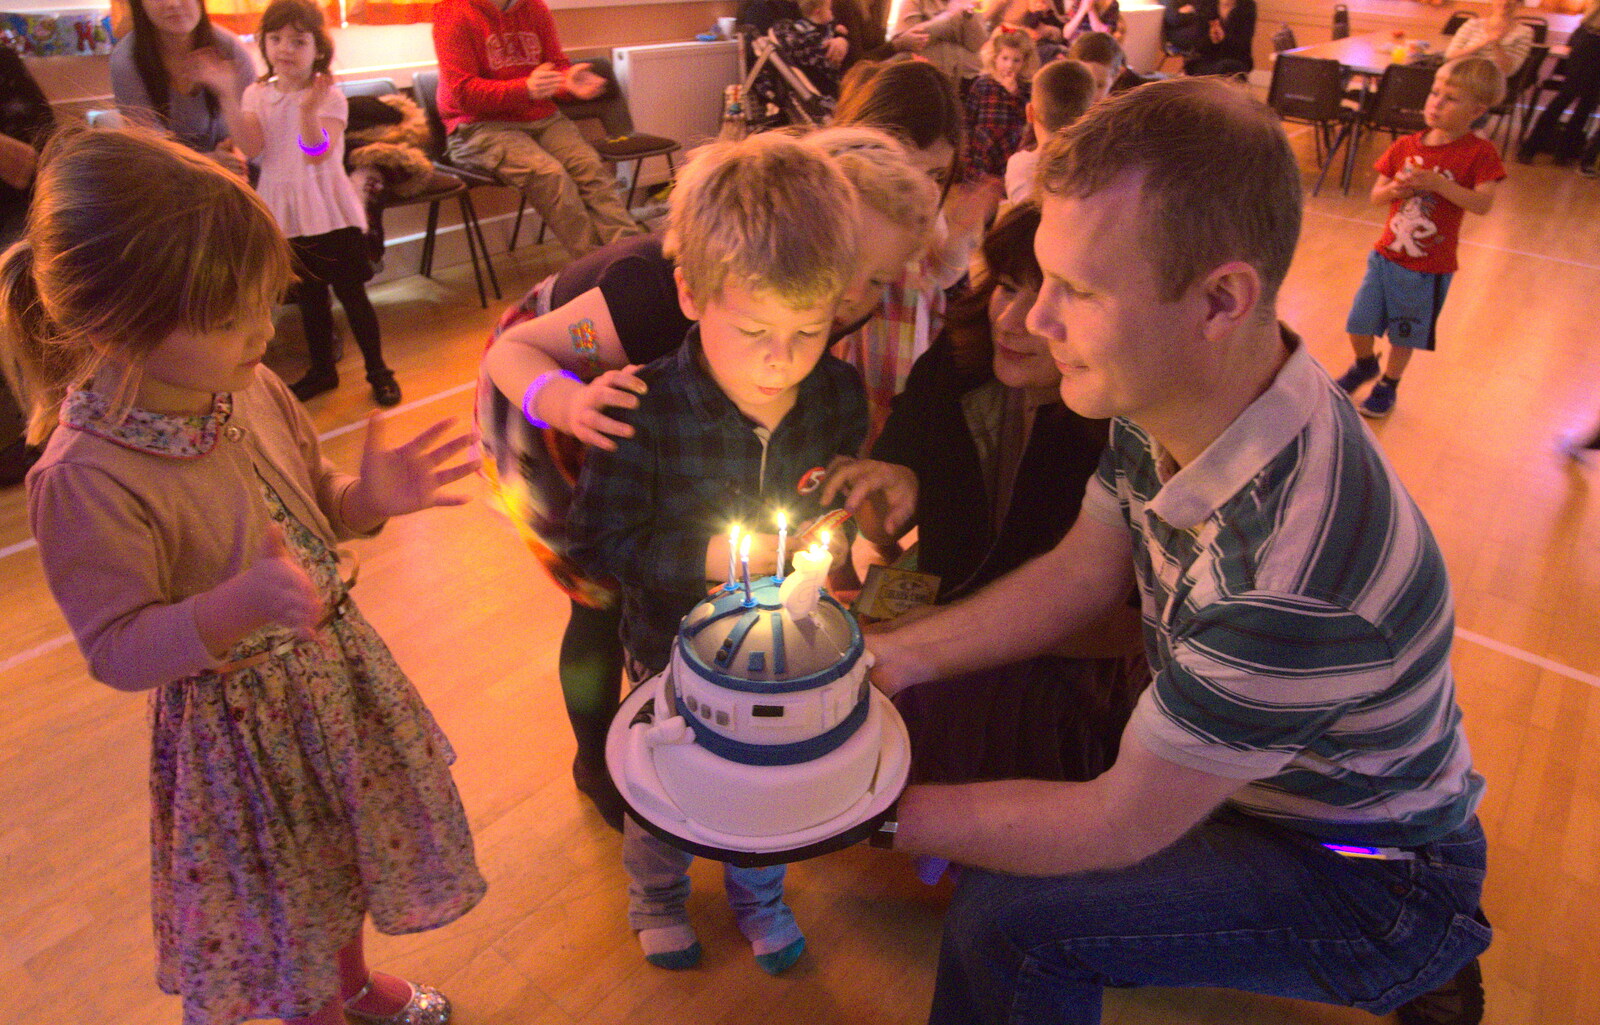 Jack's Birthday and New Windows, Brome and Brockdish, Norfolk - 4th December 2016: Jack blows his candles out